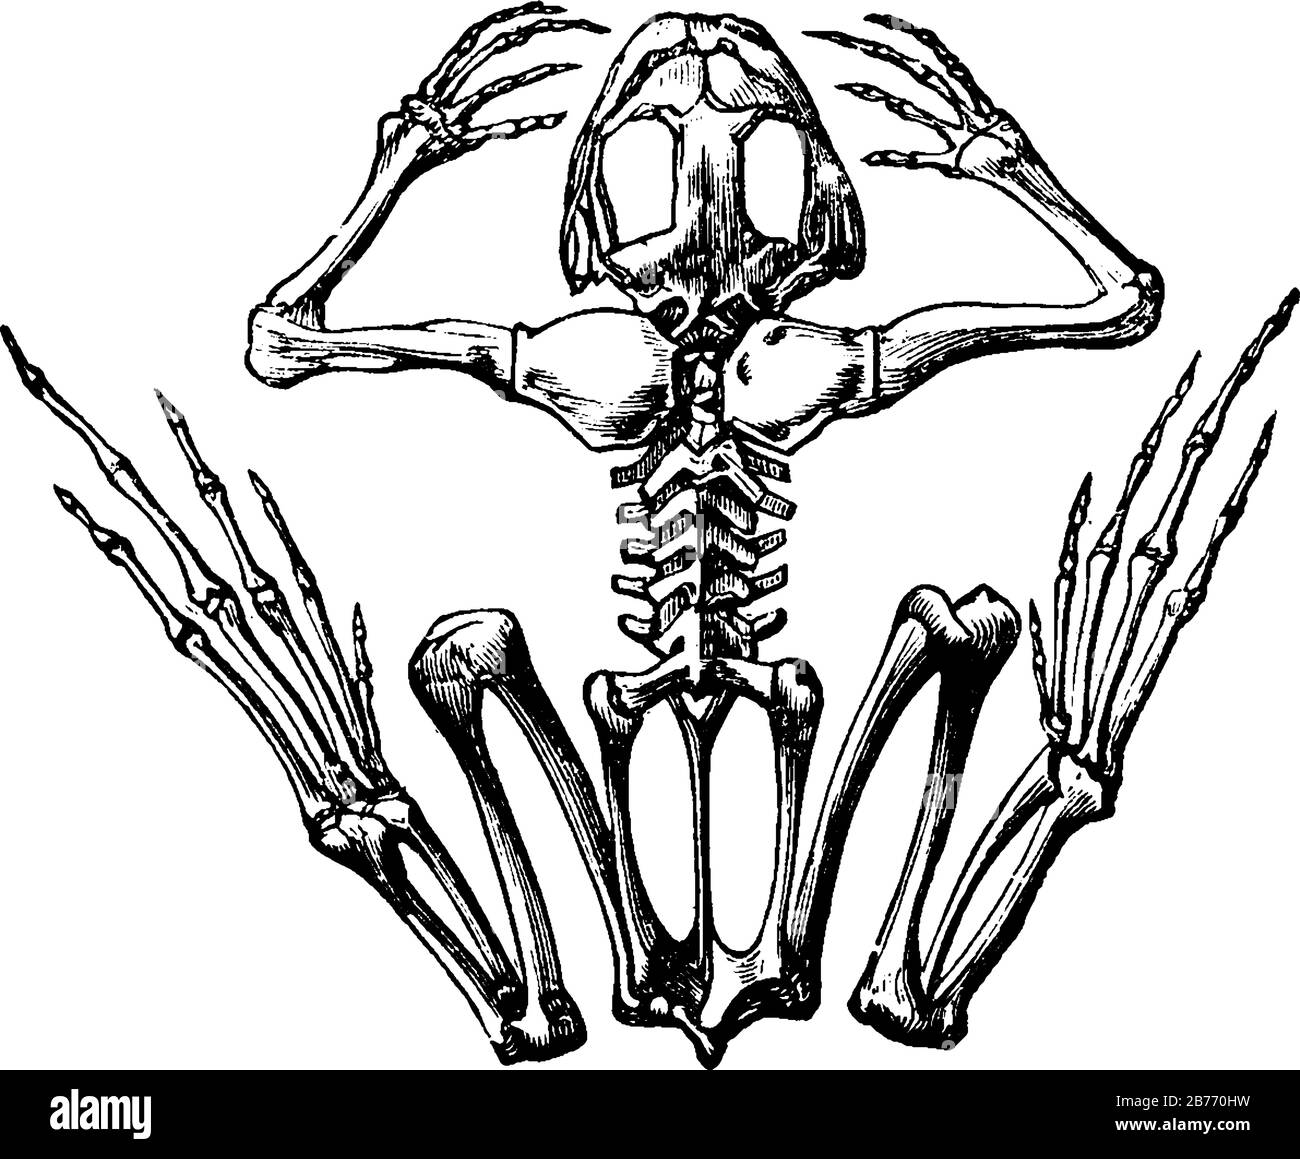 The skeleton of a frog. Frogs are carnivorous group of short-bodied, tailless amphibians of the order Anura produce a wide range of vocalizations, vin Stock Vector